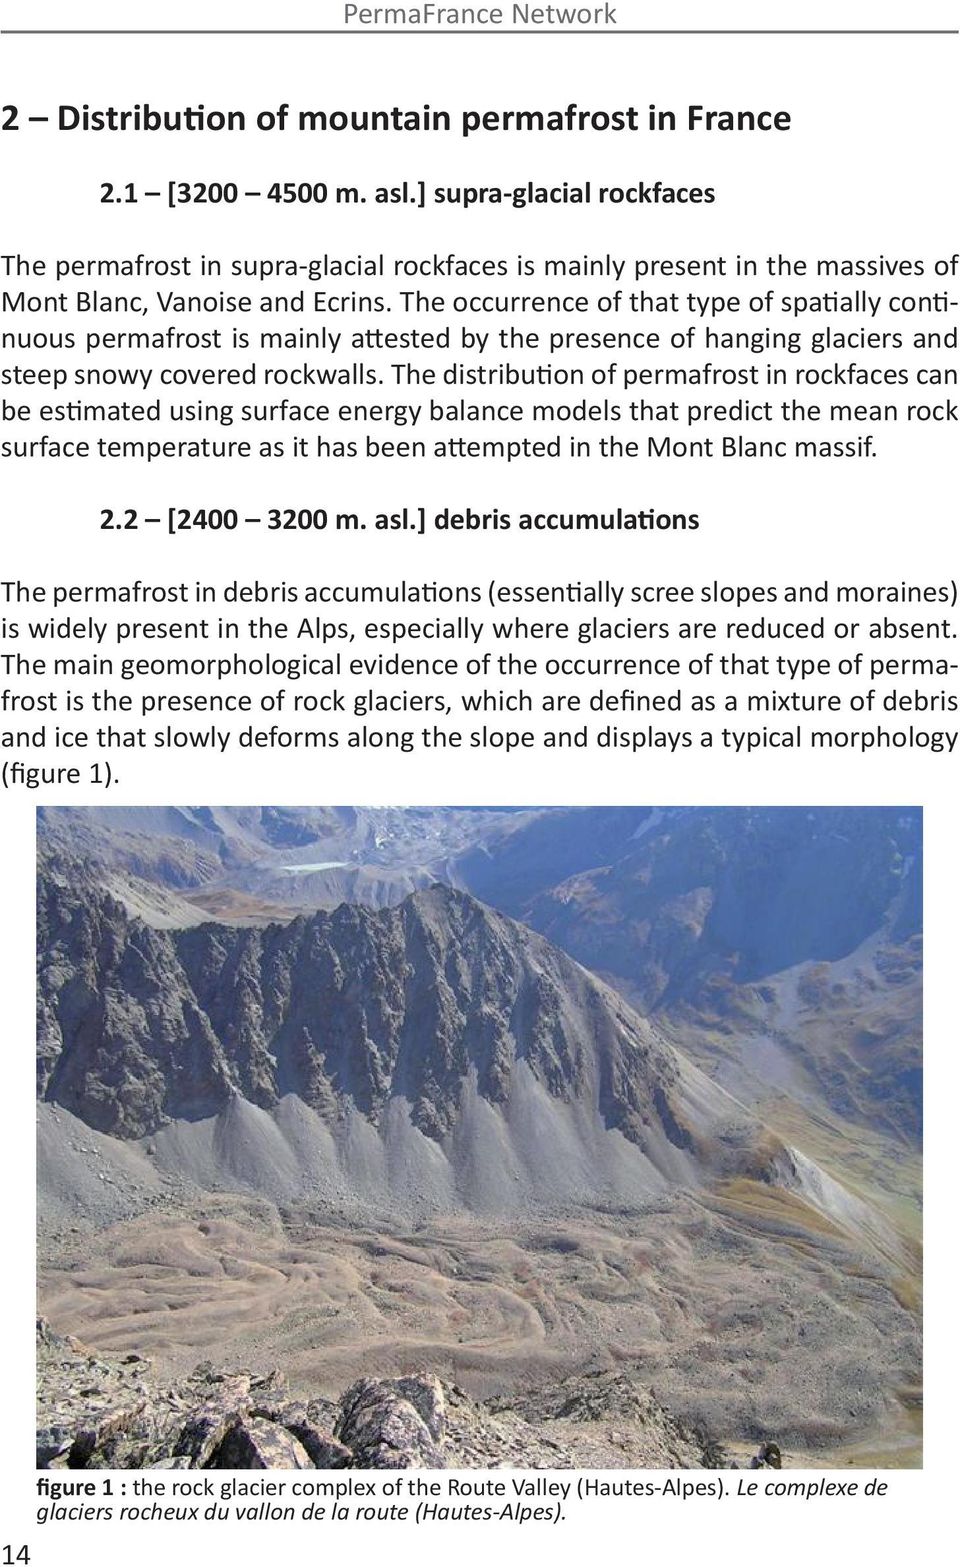 The occurrence of that type of spatially continuous permafrost is mainly attested by the presence of hanging glaciers and steep snowy covered rockwalls.